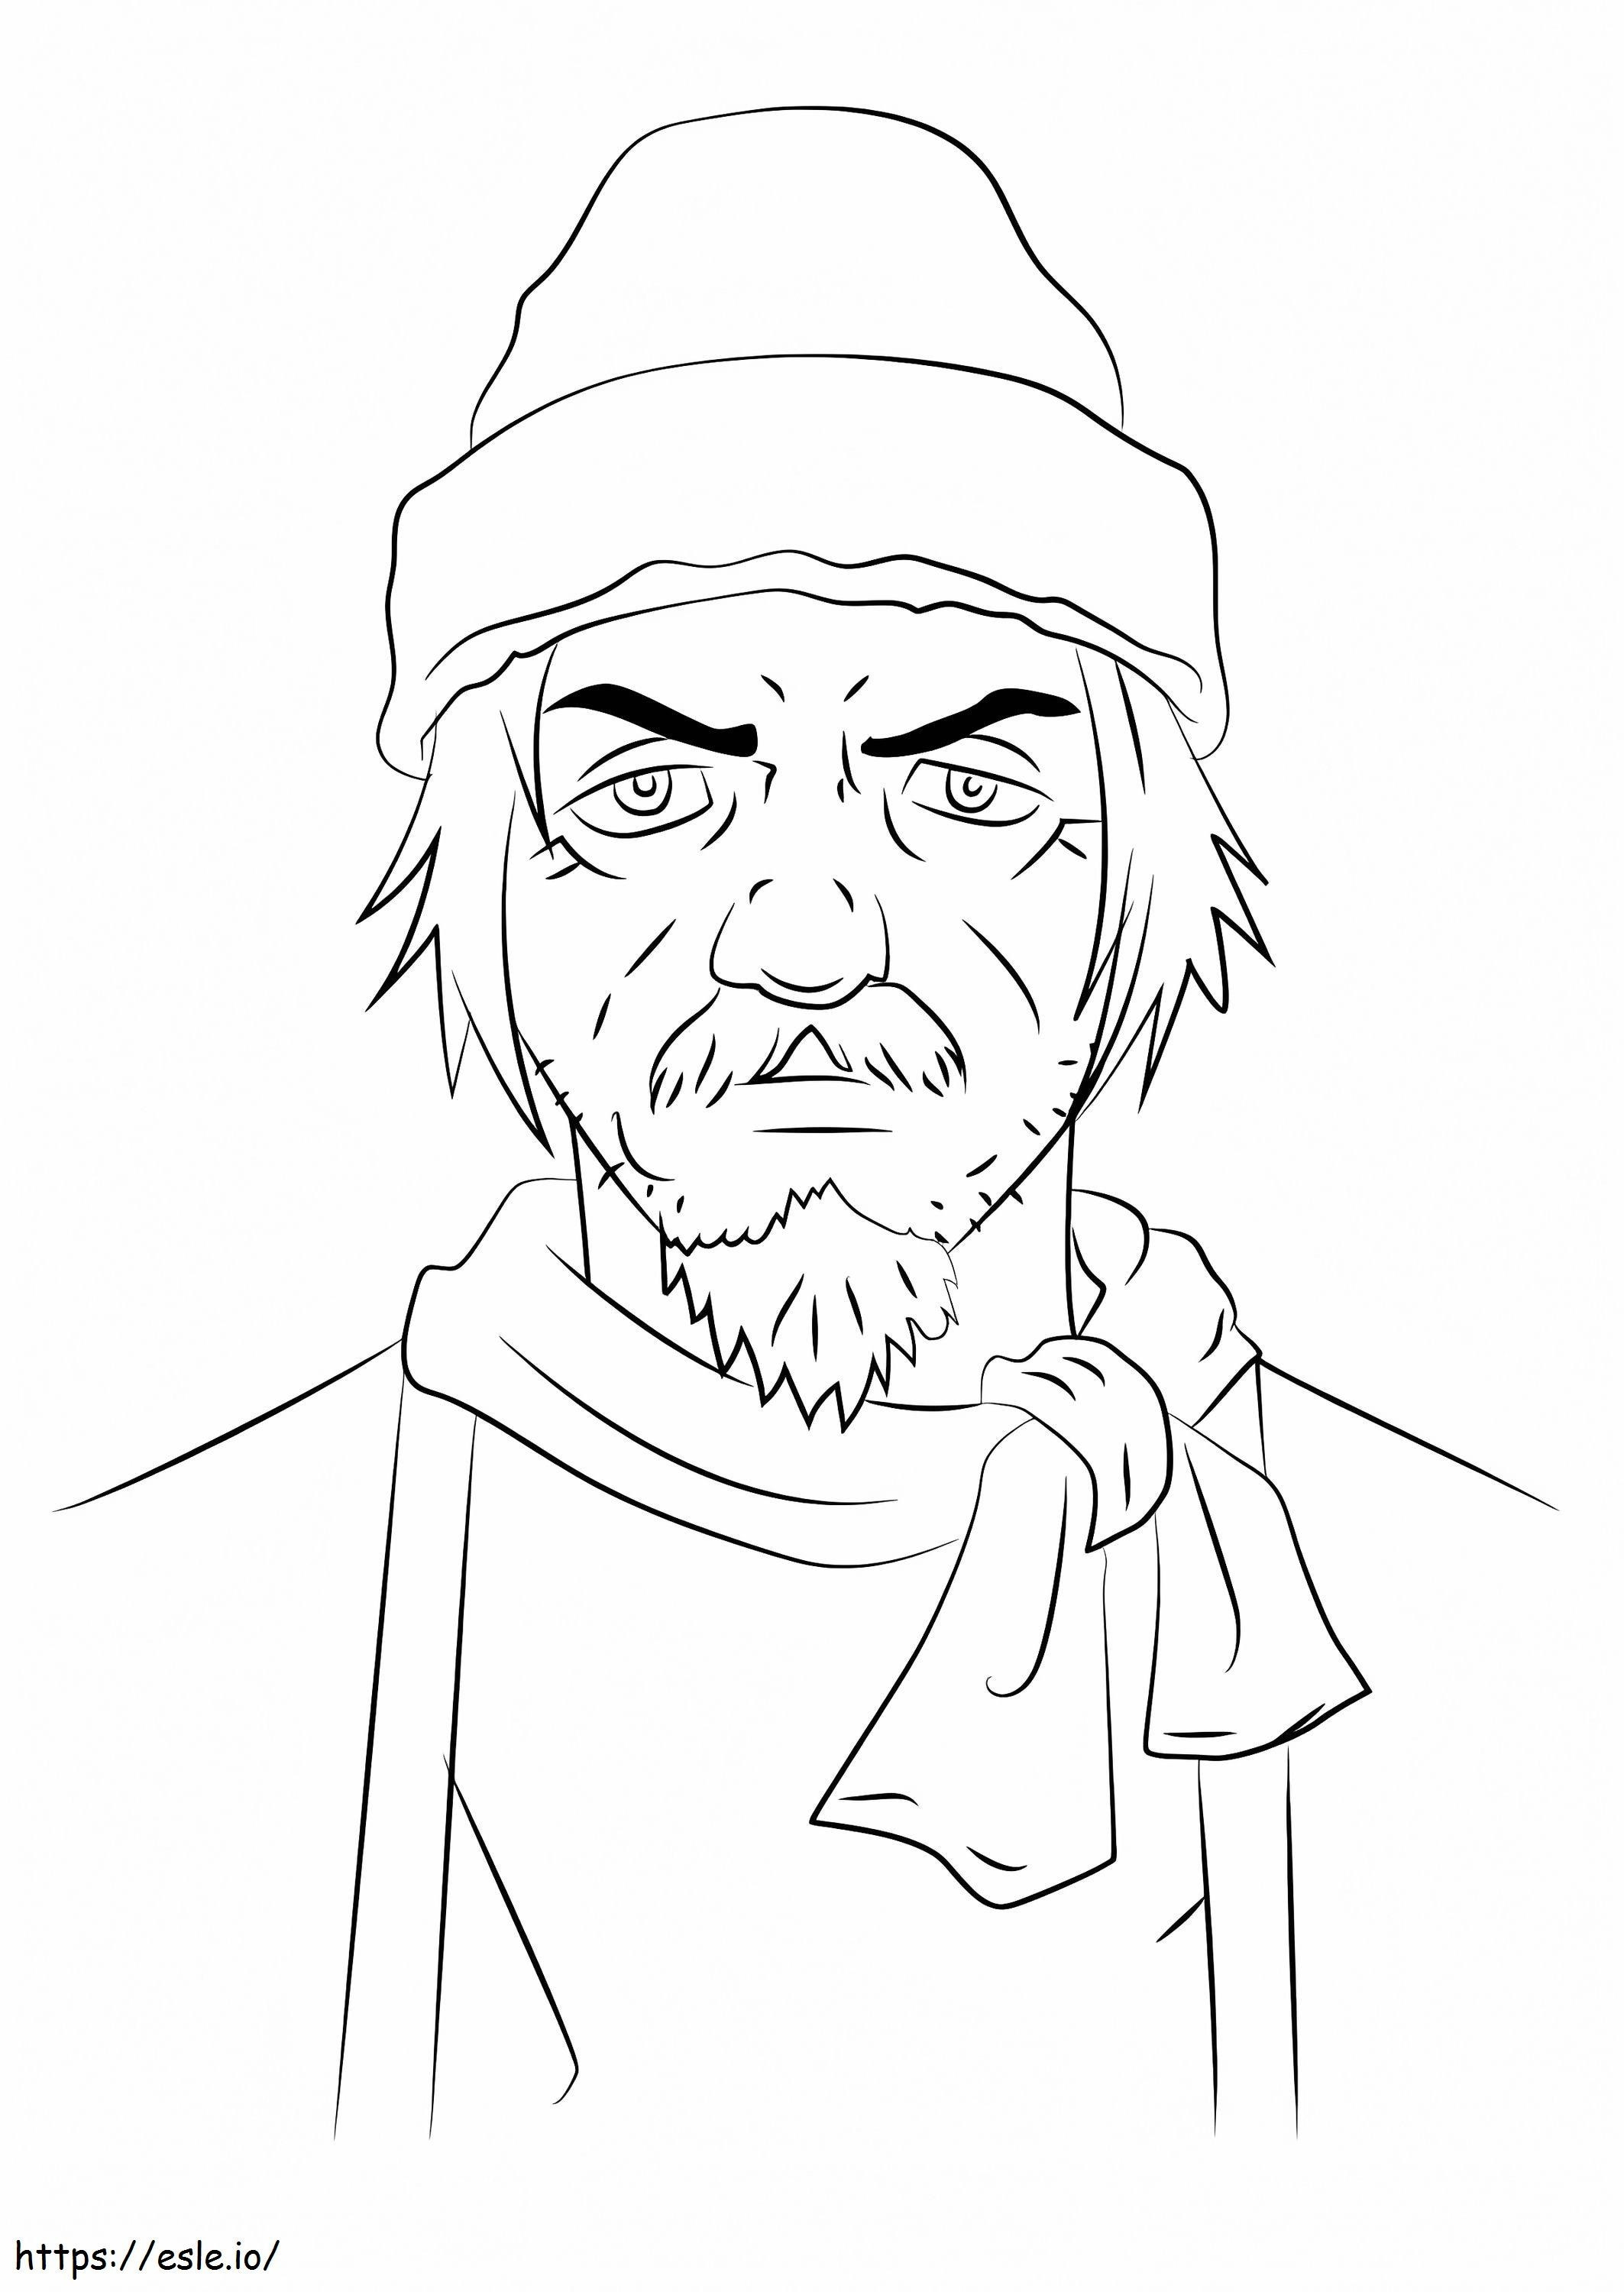 Yanni Yogi From Ace Attorney coloring page